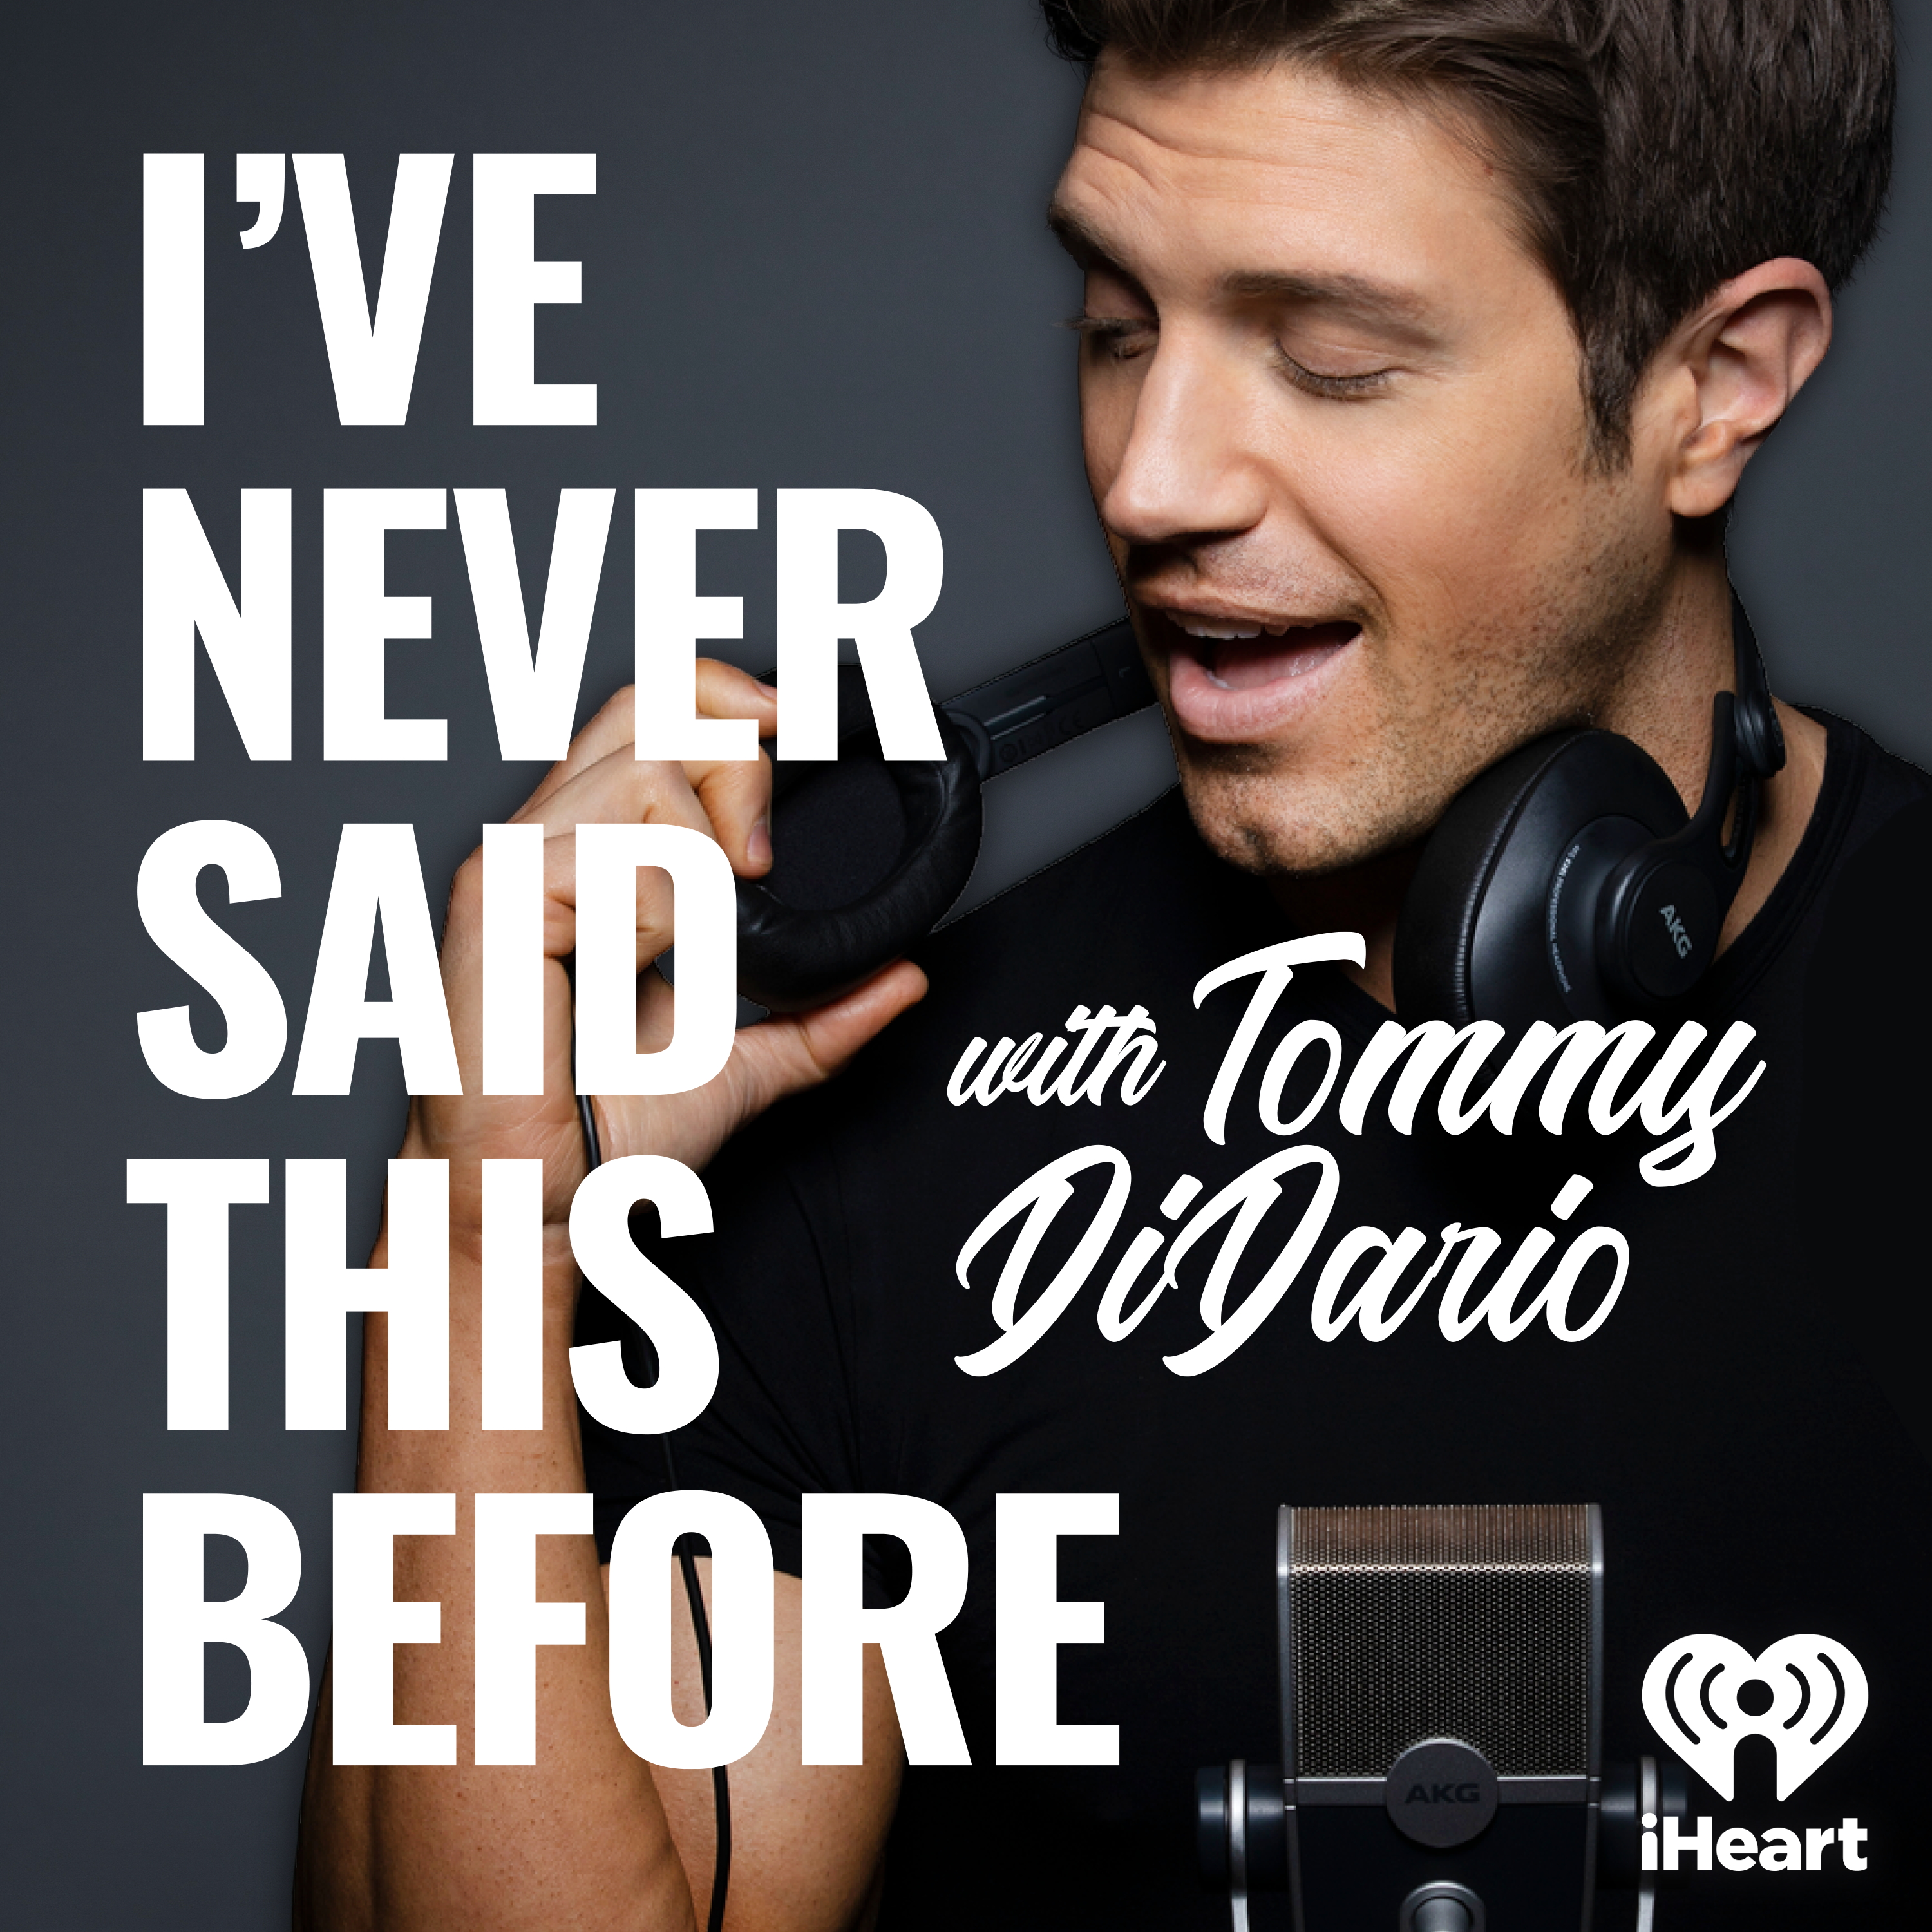 Introducing: I've Never Said This Before with Tommy DiDario